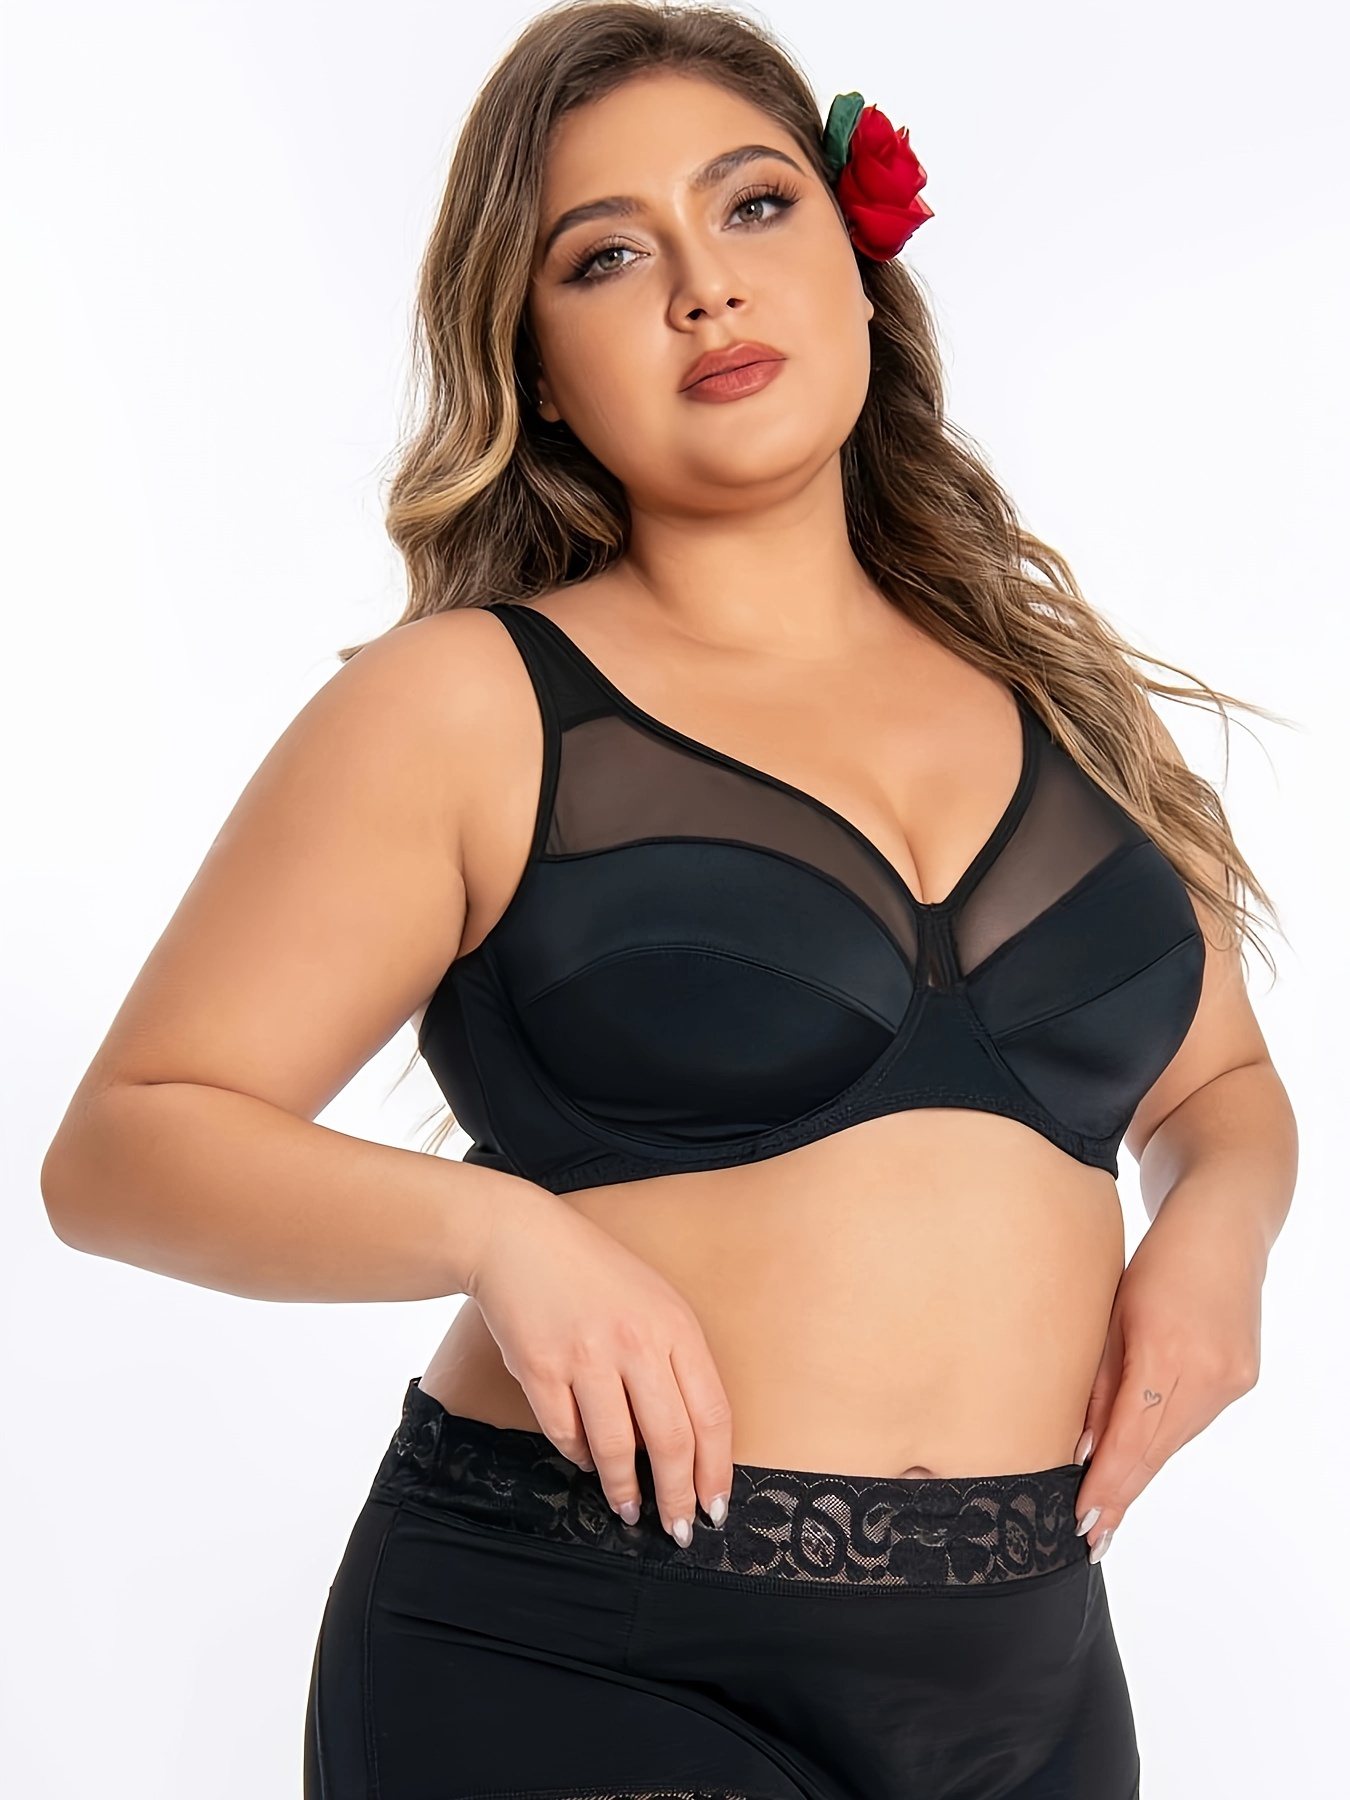 Bras for Women No Underwire No Padding Plus Size Full Cup Thin Underwear  Plus Size Front Button Wireless Lace